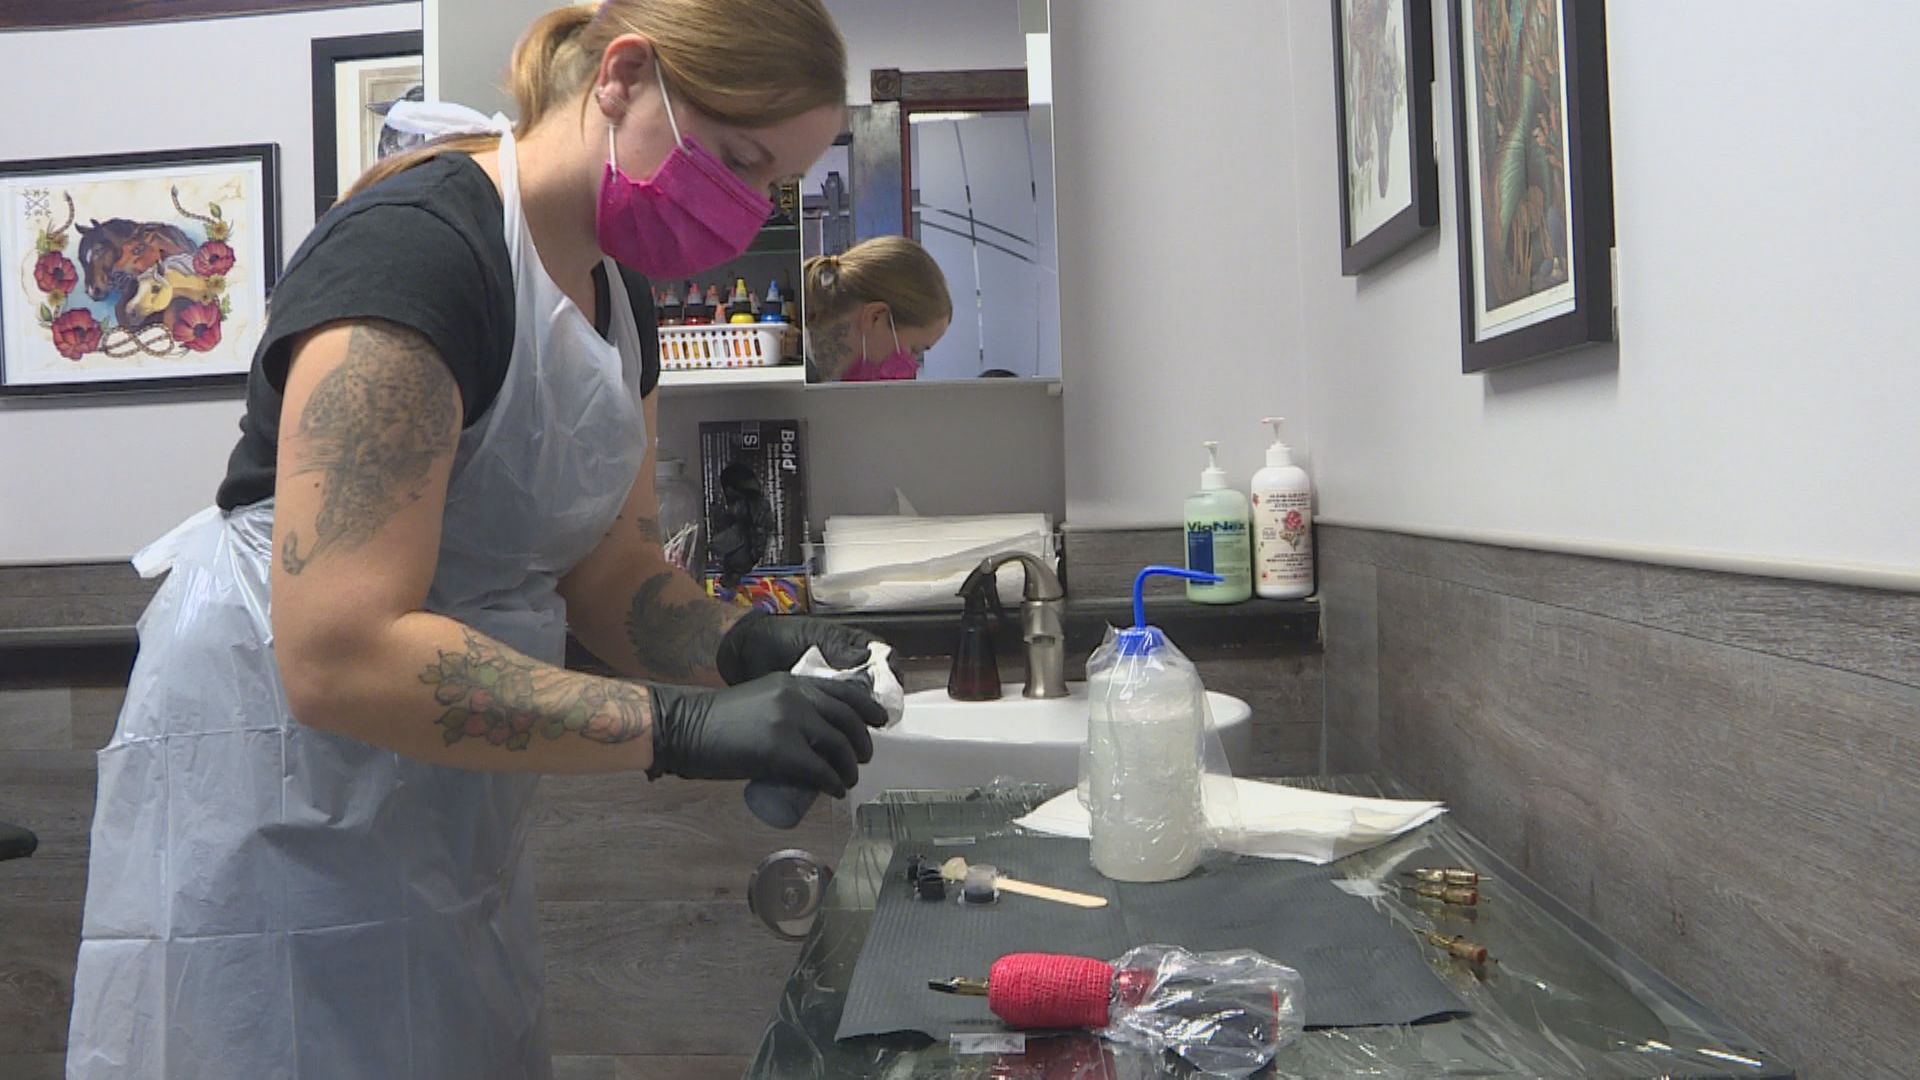 My schedule is really packed': How COVID-19 has led to long wait times for tattoos - Winnipeg